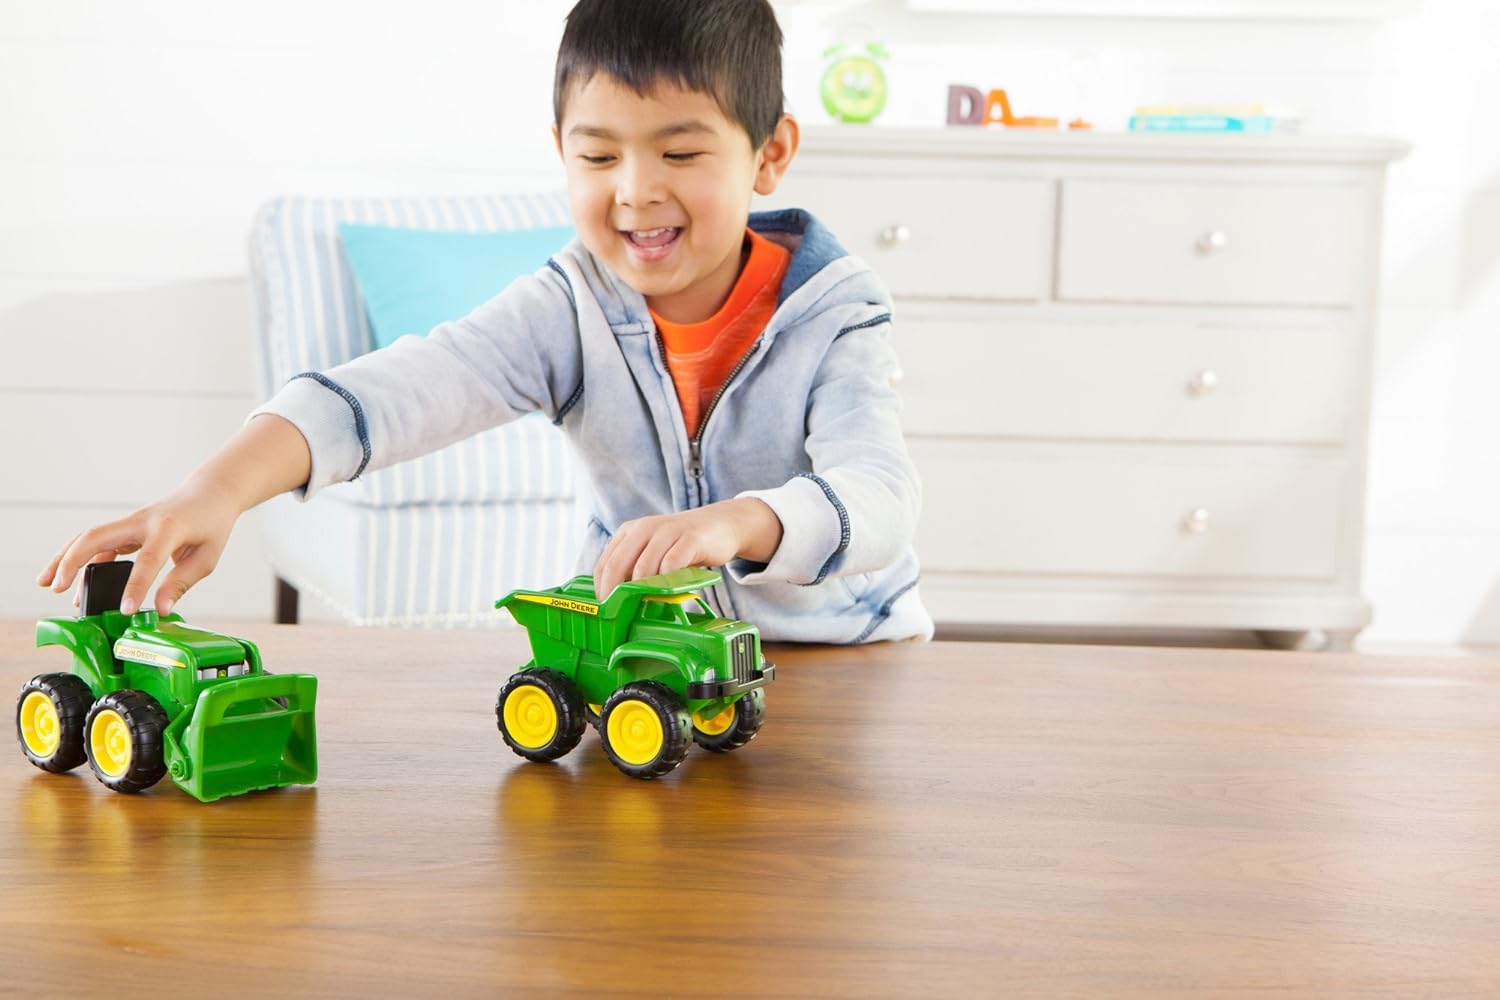 John Deere Sandbox Toys Vehicle Set - Includes Dump Truck Toy, Tractor Toy with Loader - 6 Inch - 2 Count, Green, Frustration Free Packaging